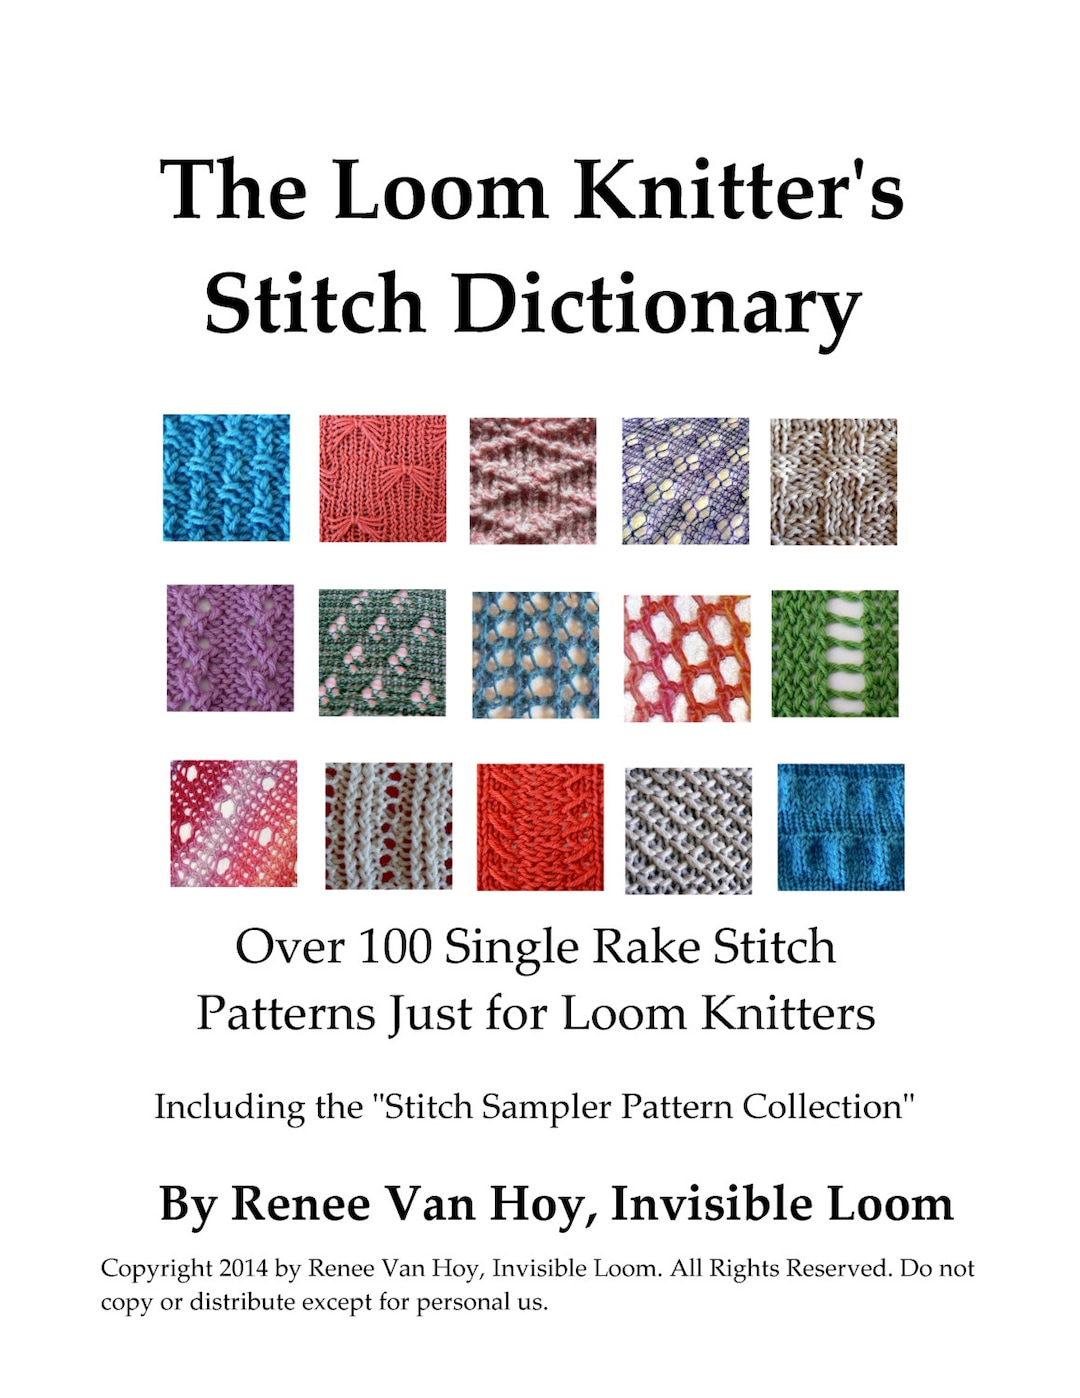 Stitch by Stitch book series : A home library of sewing , KnittingLOts  of 5